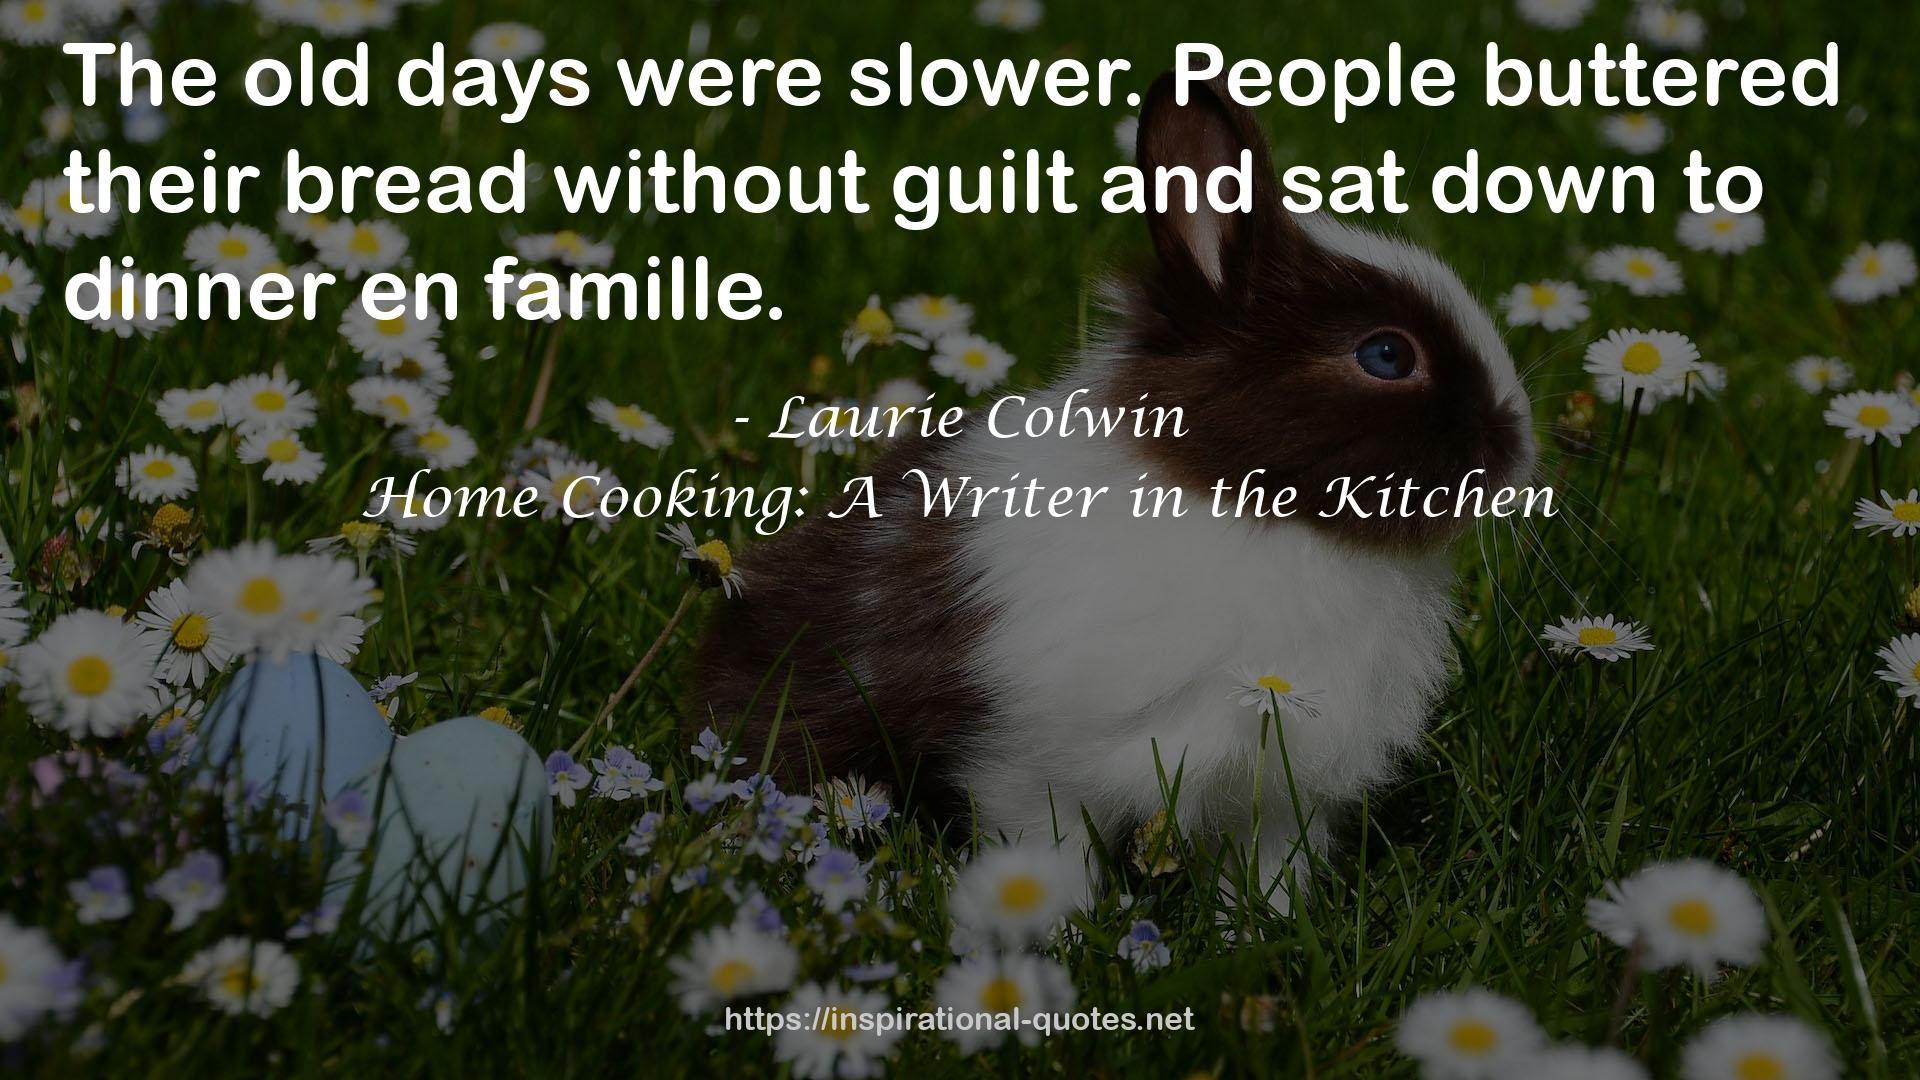 Home Cooking: A Writer in the Kitchen QUOTES